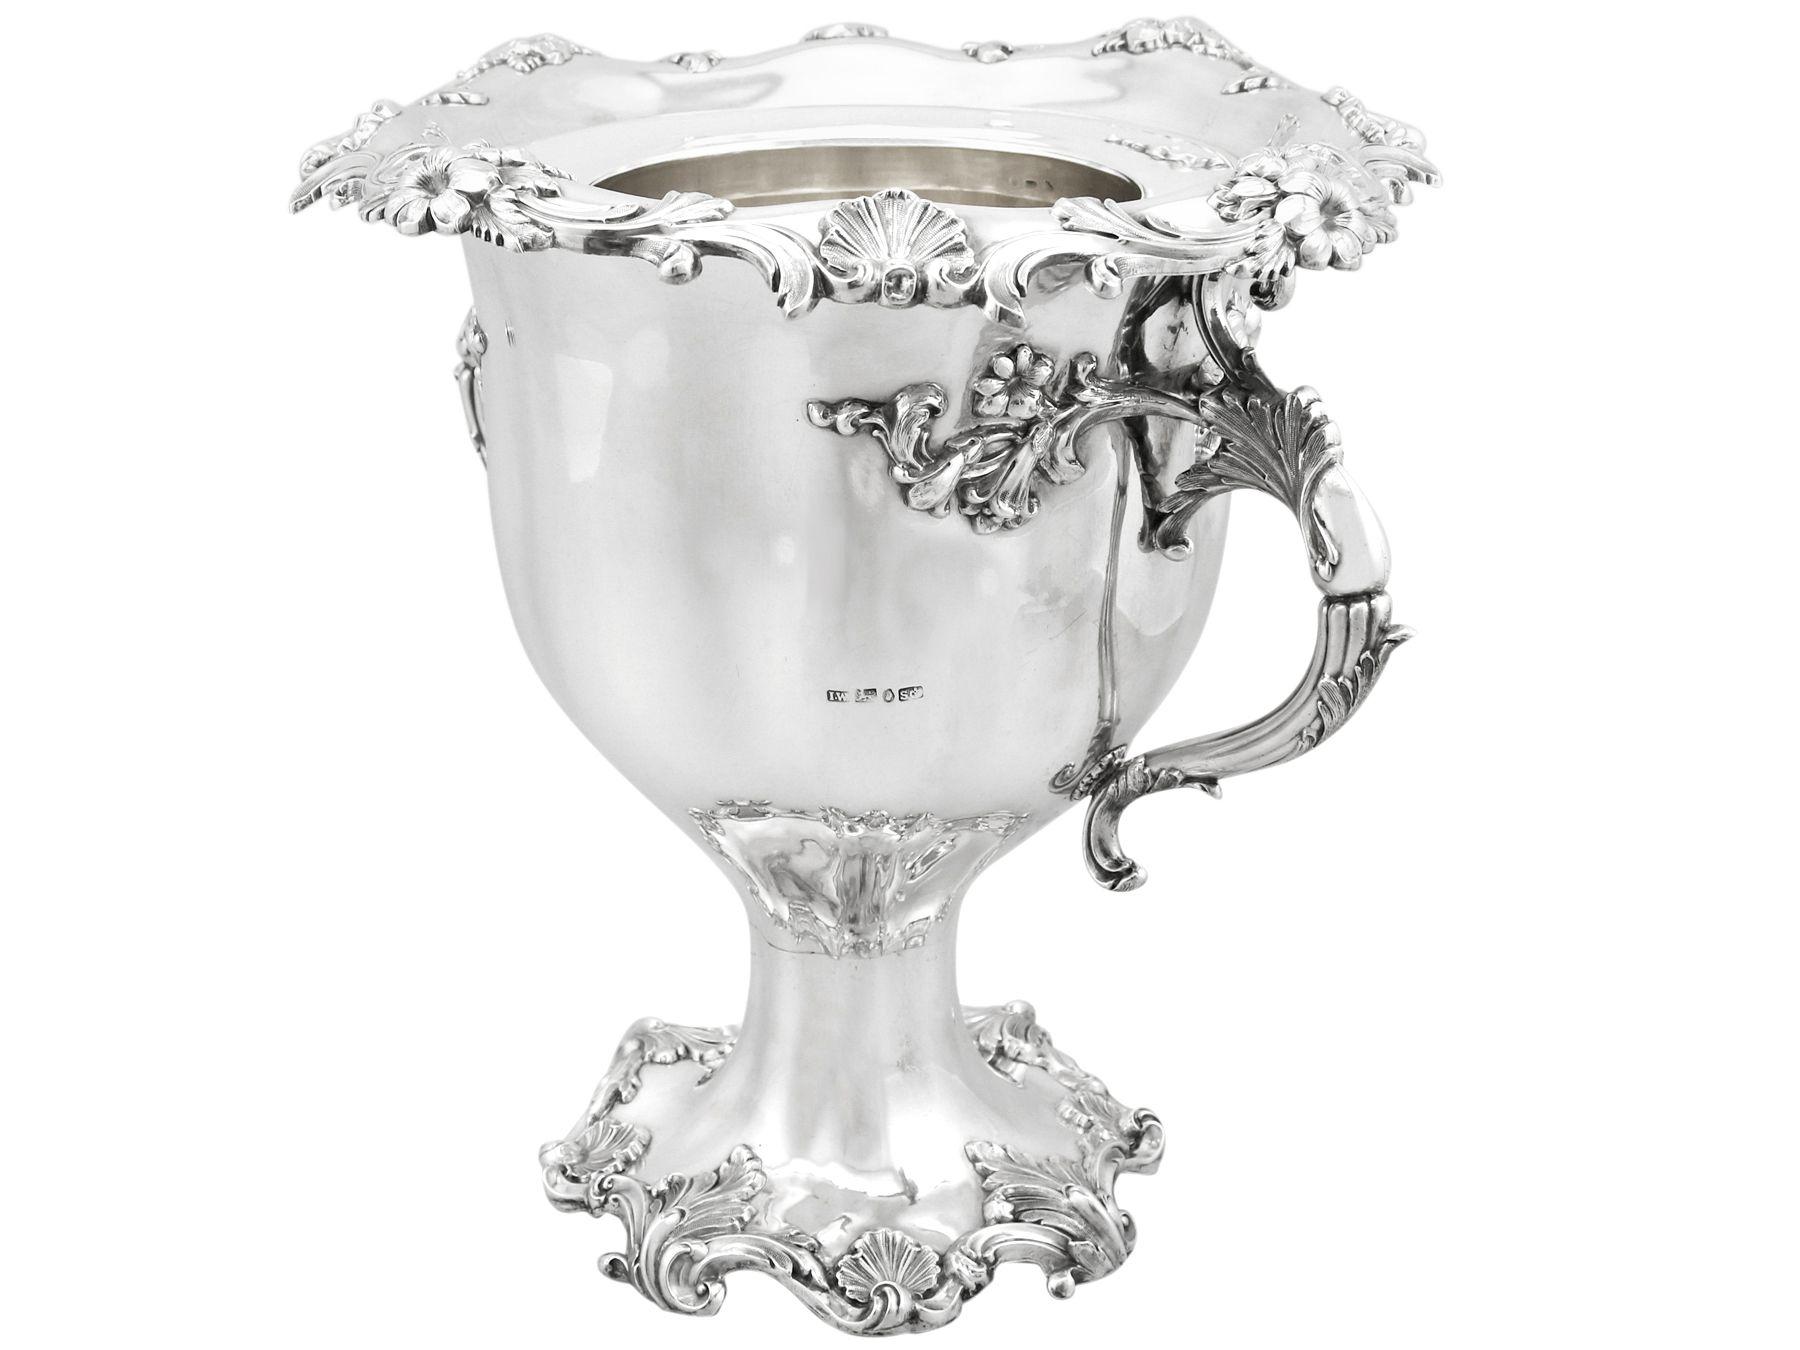 An exceptional, fine and impressive antique Victorian English sterling silver wine or champagne cooler; an addition to our presentation silverware collection

This exceptional antique sterling silver wine cooler has a circular plain rounded bell